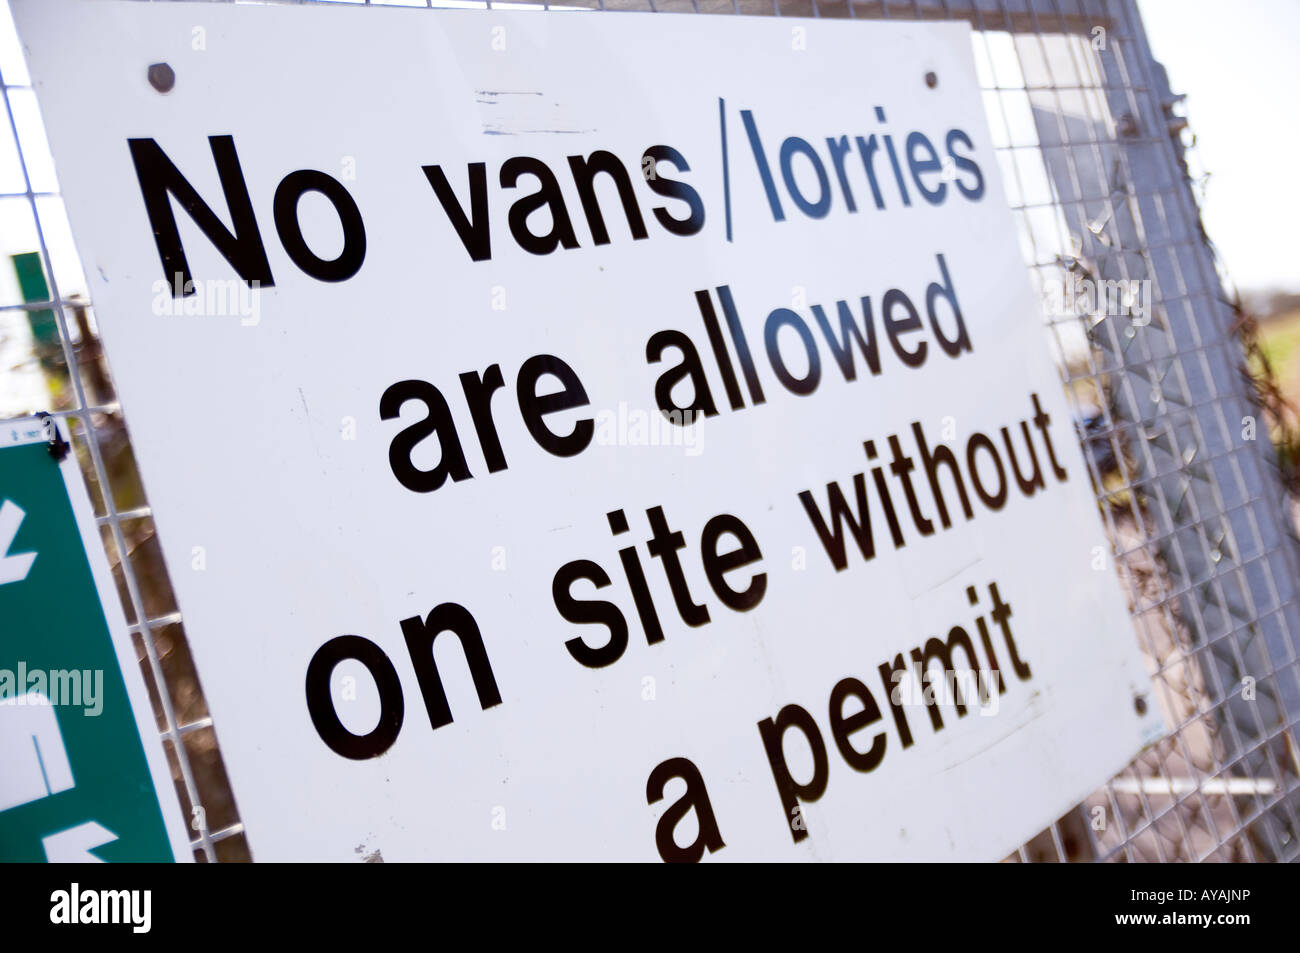 no van lorries on site without a permit white metal sign on a fence Stock Photo